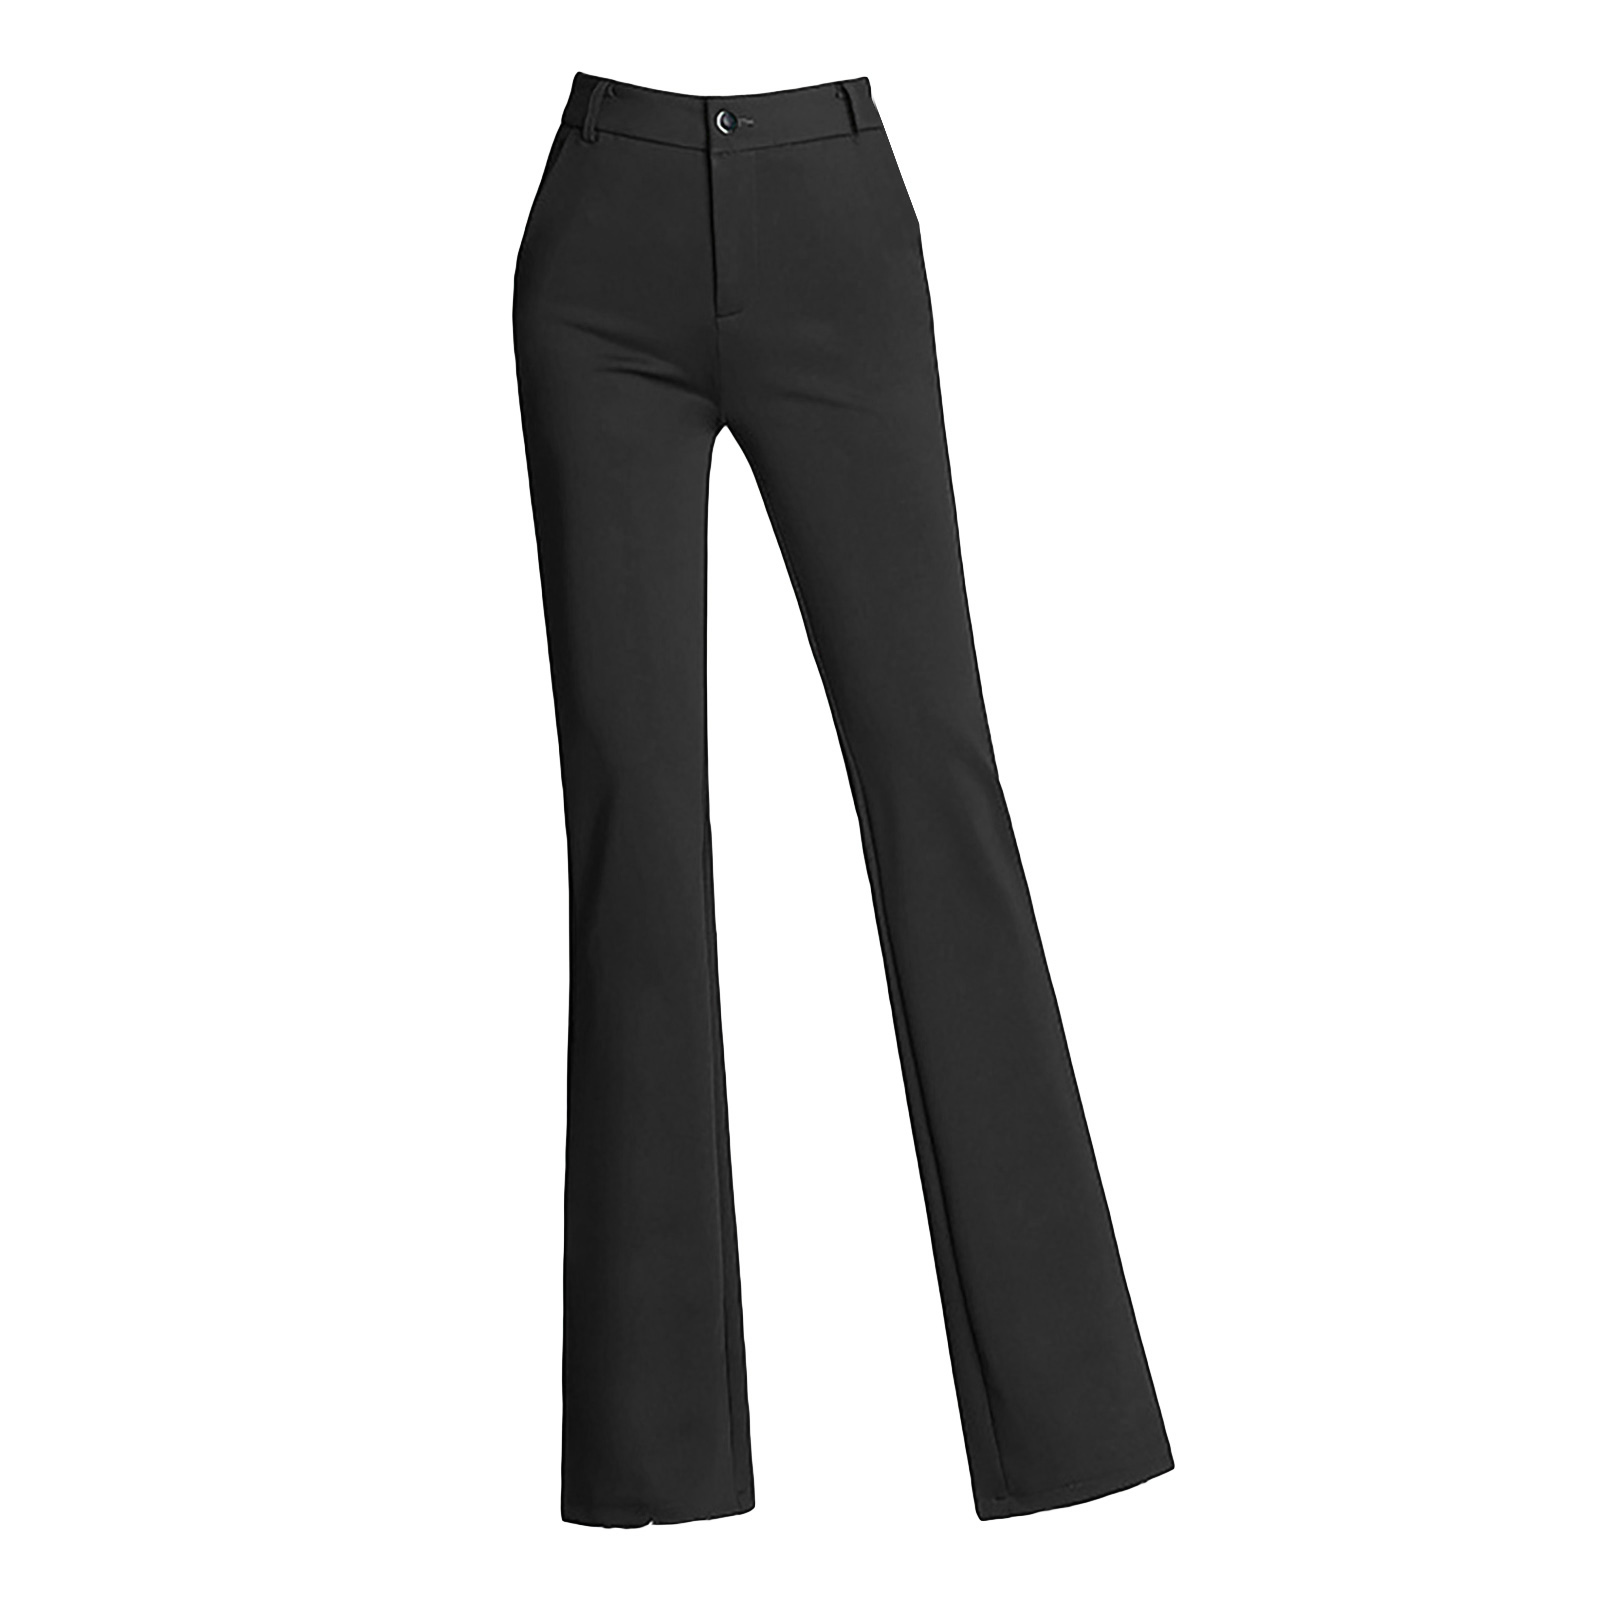 Female Trouser Soft Casual Loose Slim Flared Trousers Formal Wear